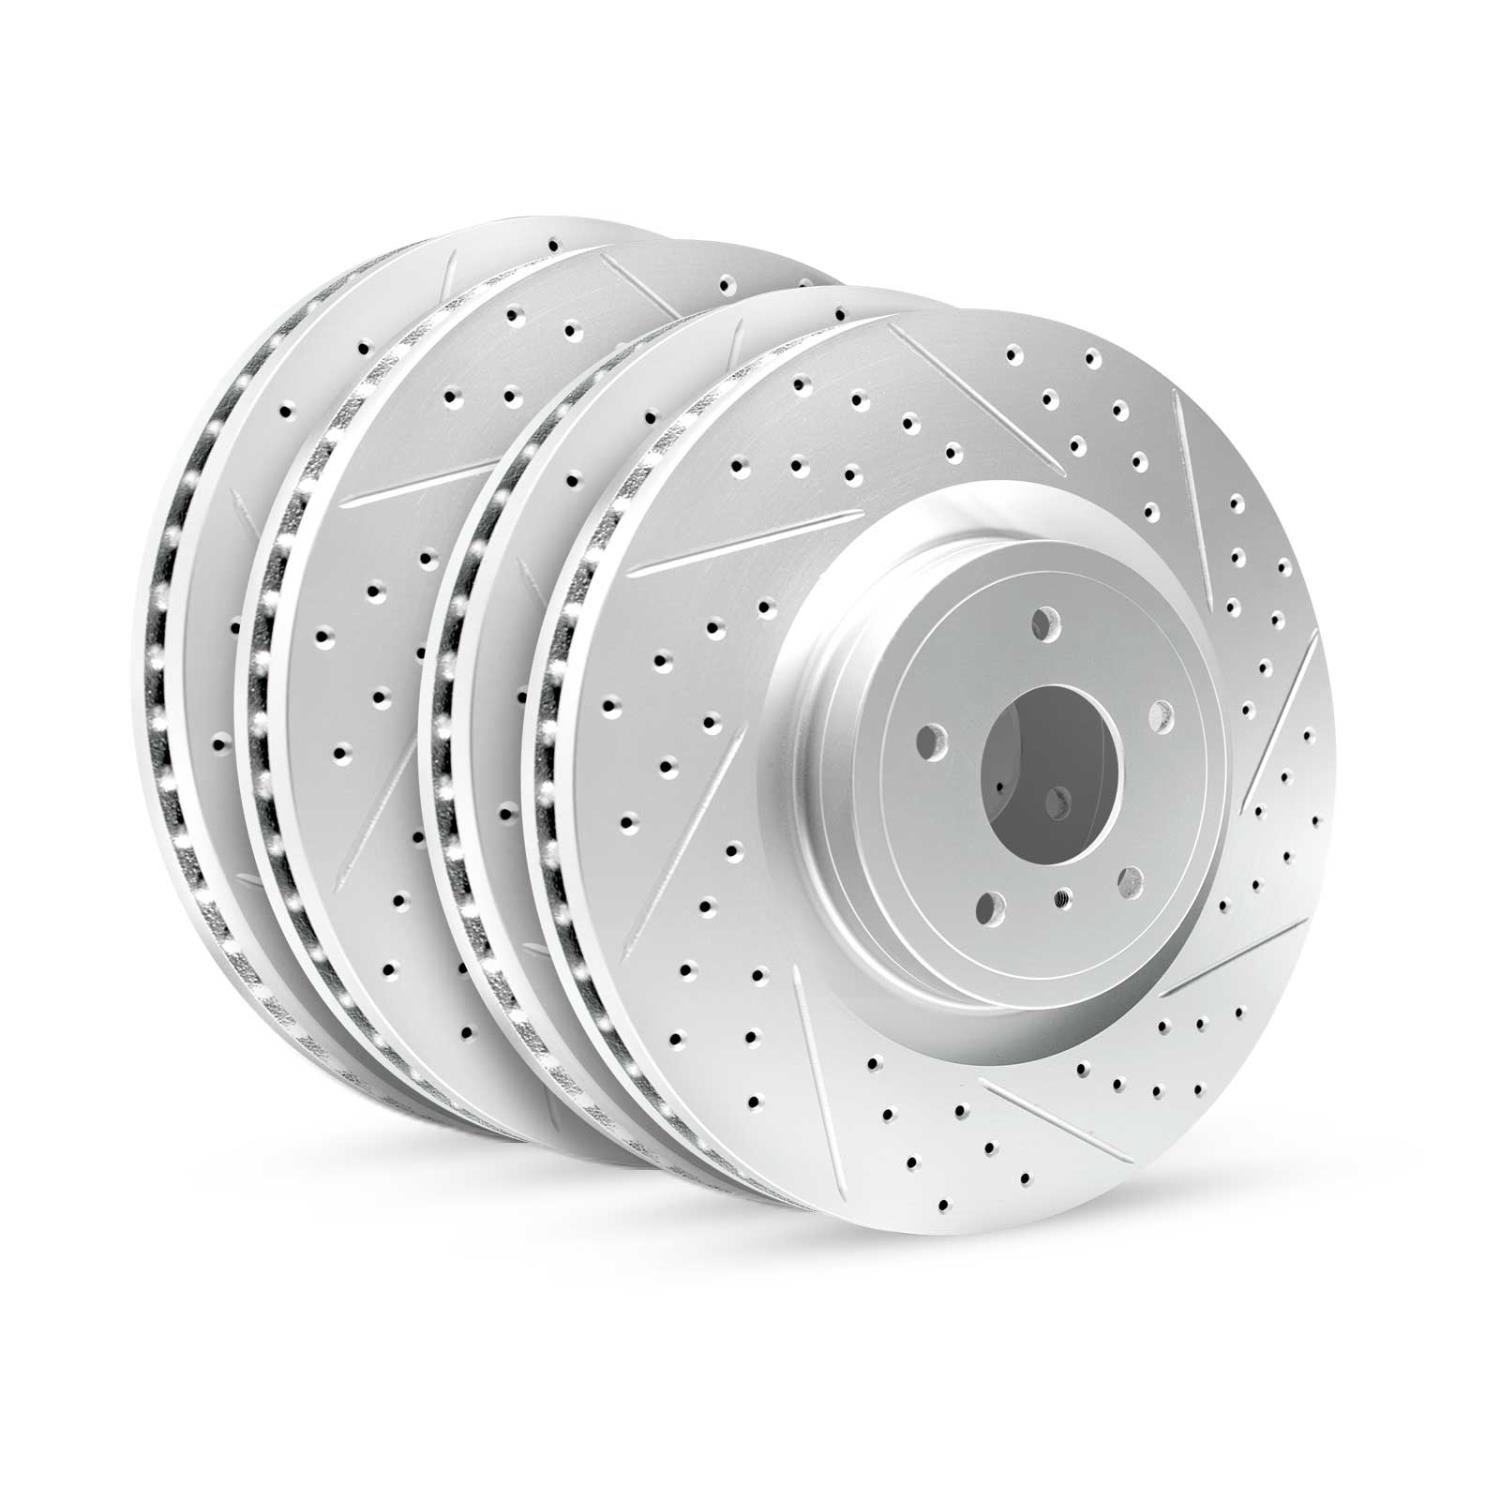 GEO-Carbon Drilled/Slotted Rotors, Fits Select BMW, Position: Front/Rear